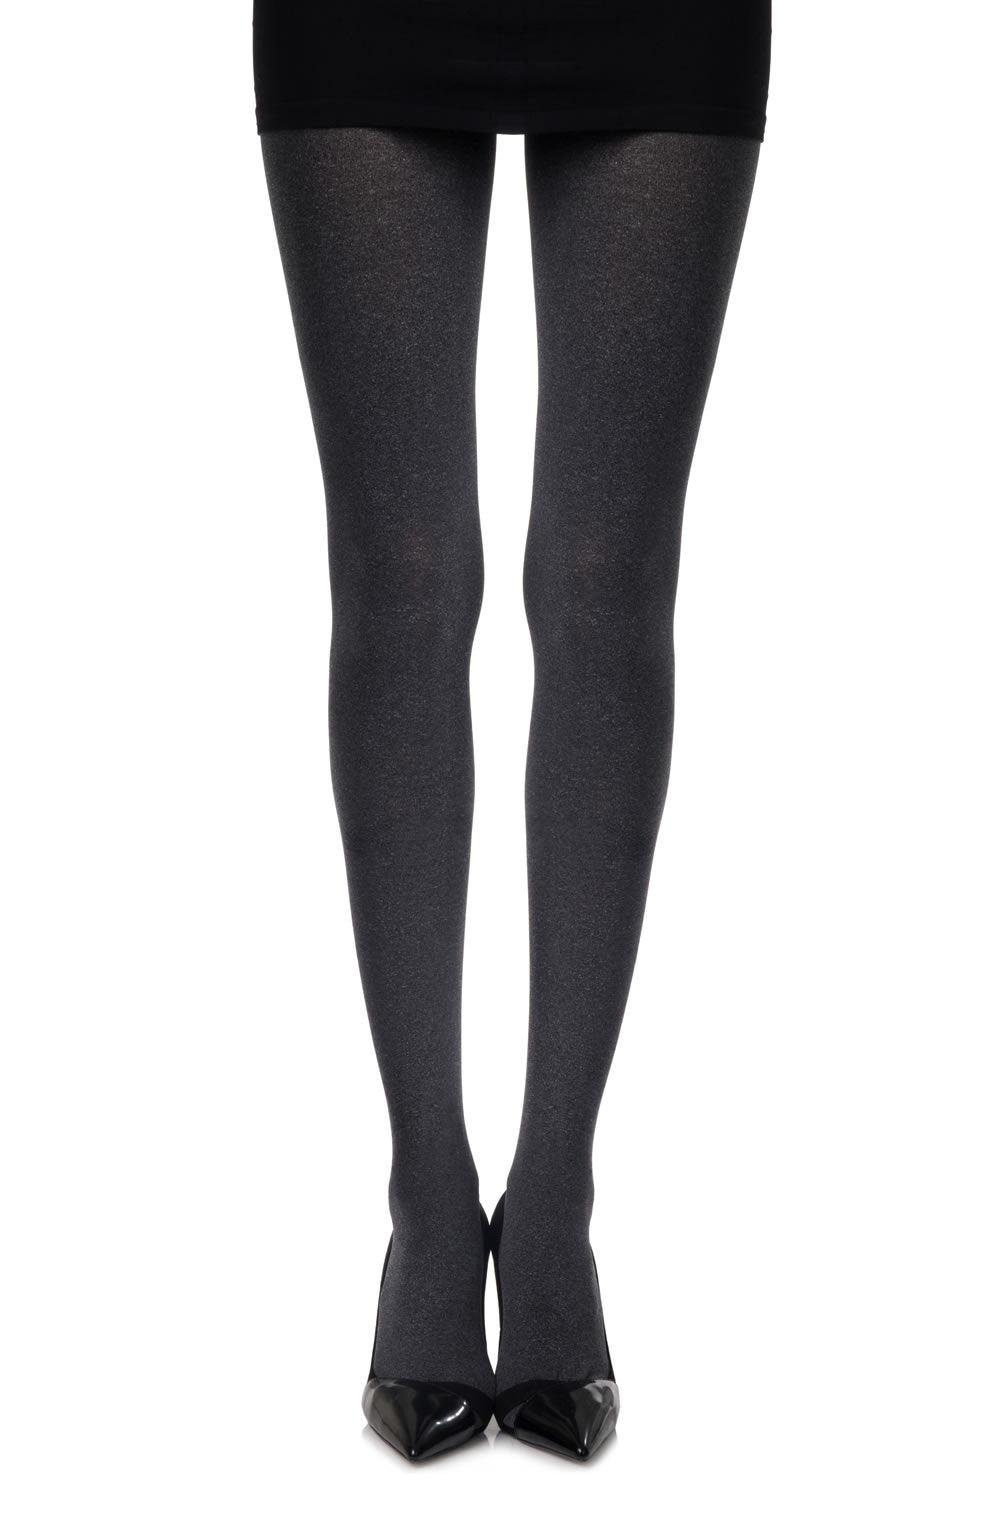 Zohara Heather Grey Opaque Tights - Sydney Rose Lingerie 